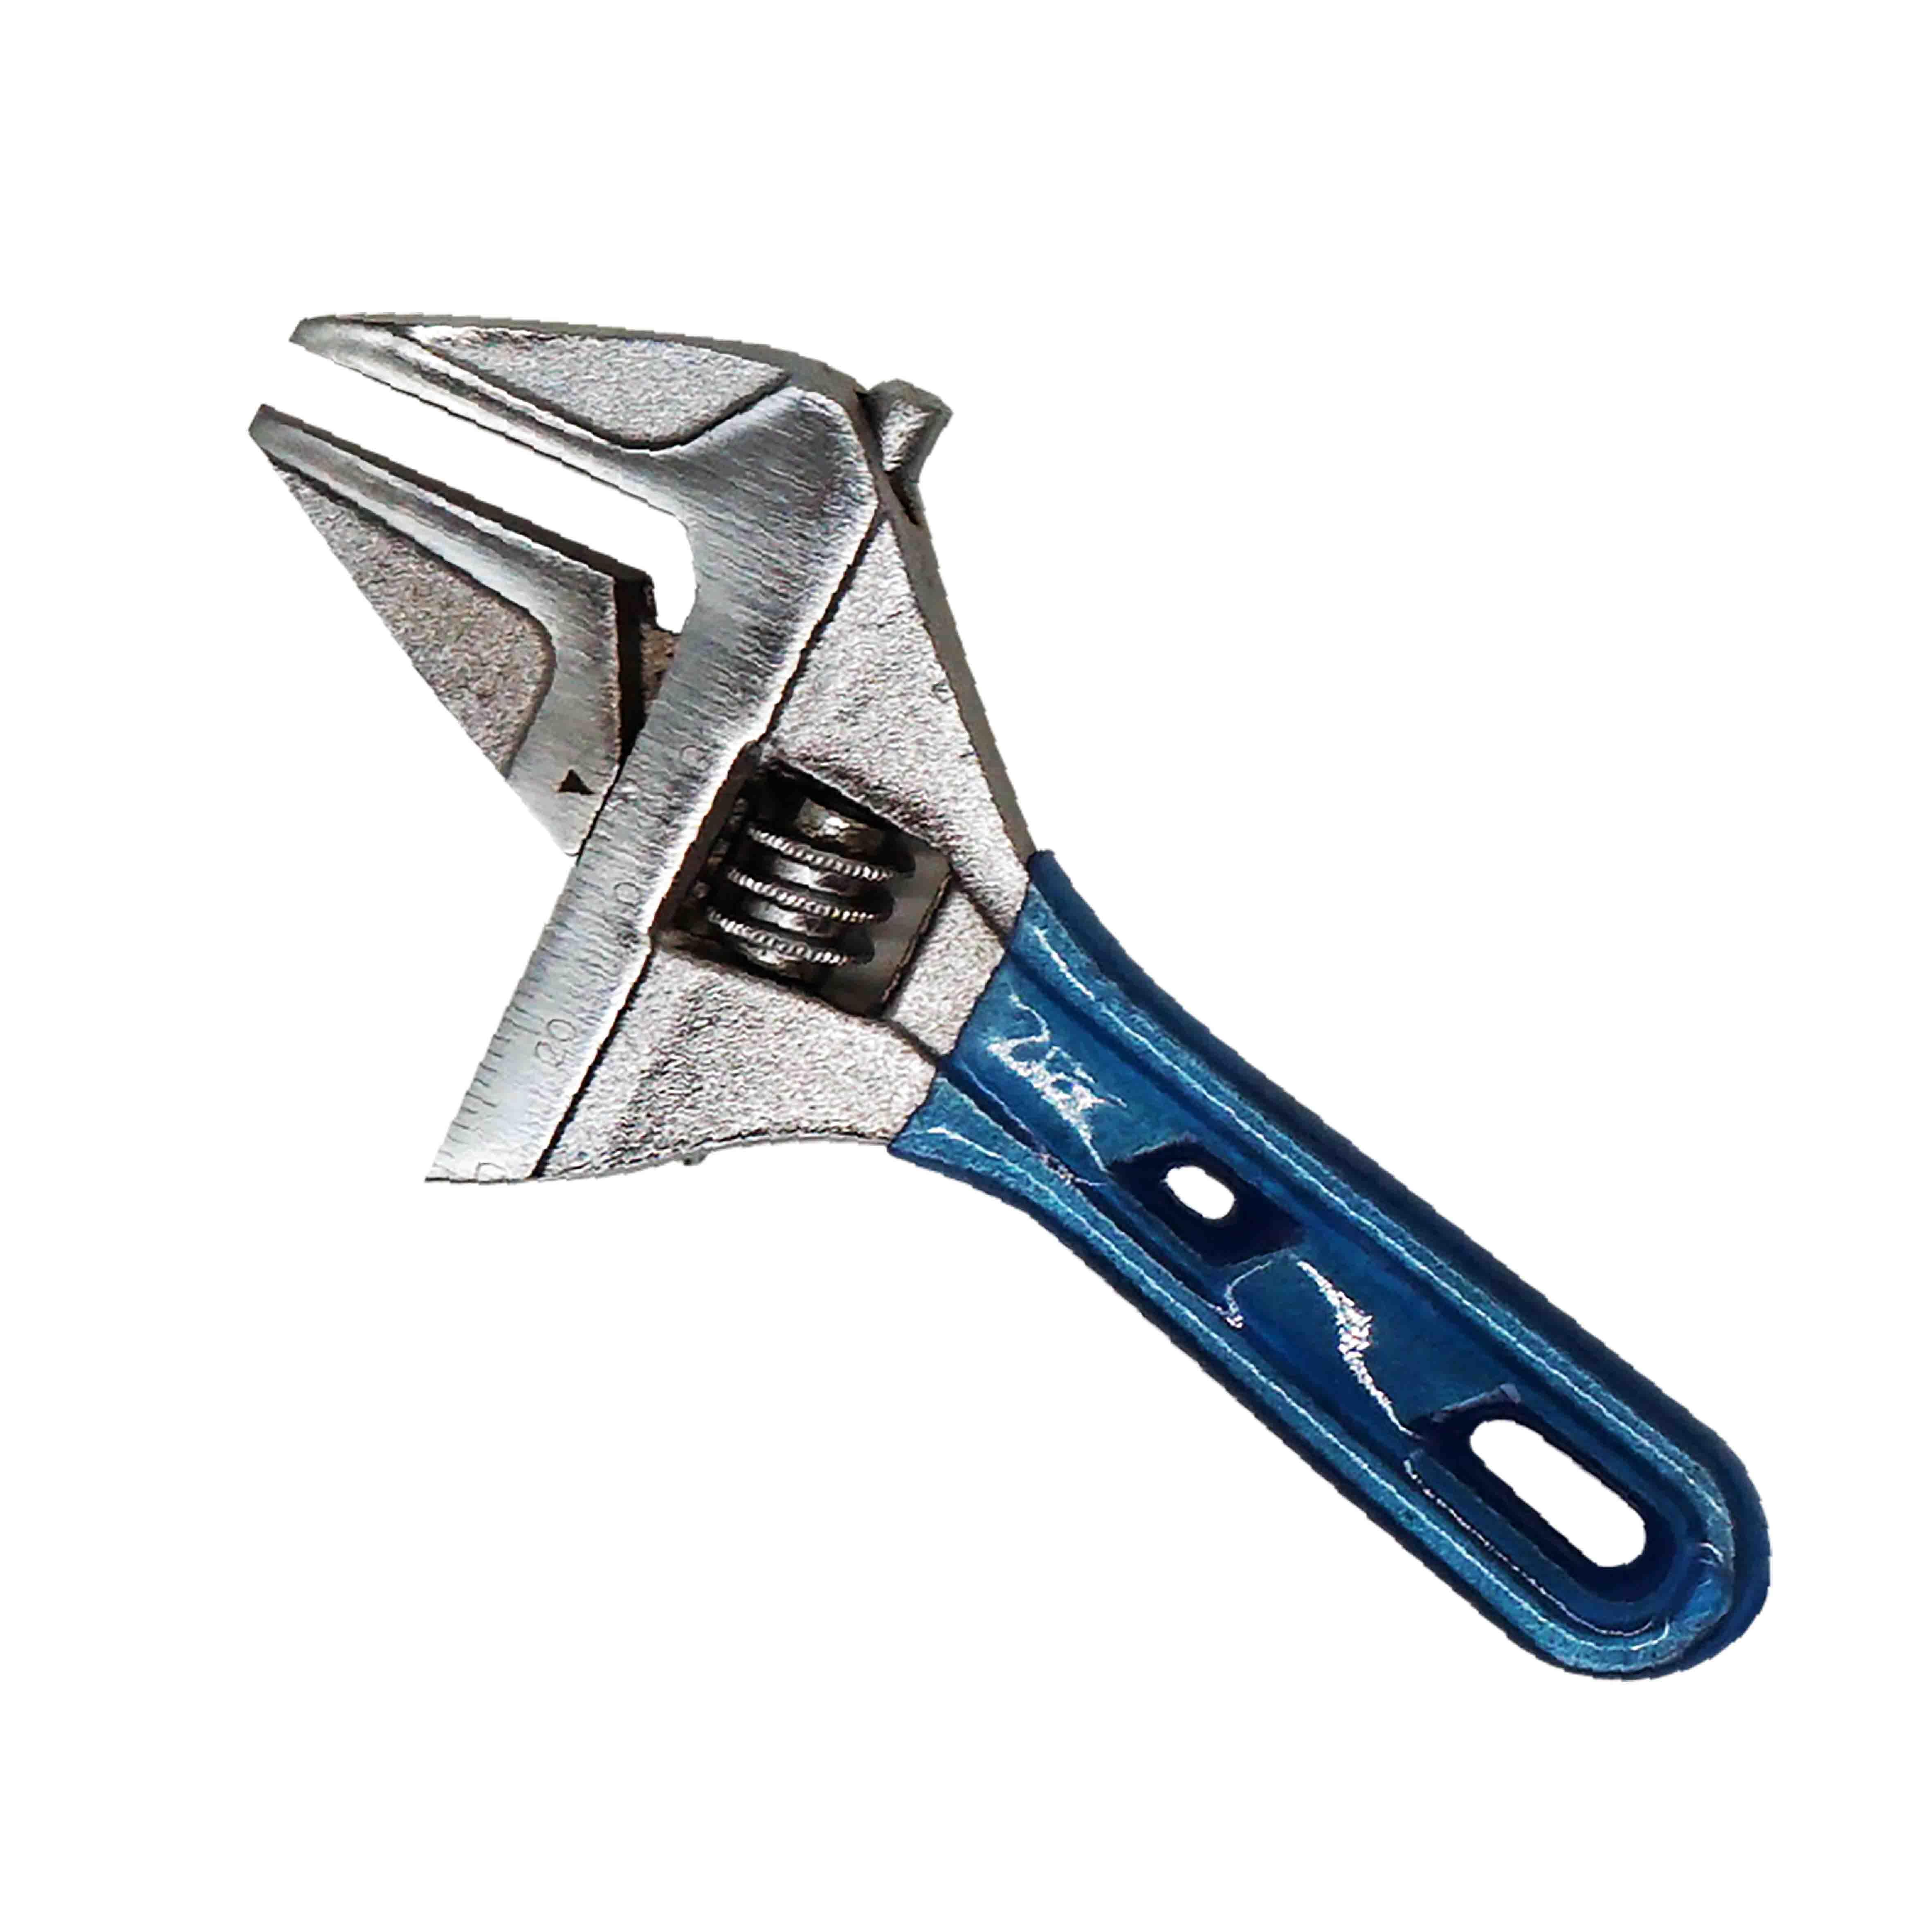 WIDE OPEN ADJUSTABLE WRENCH